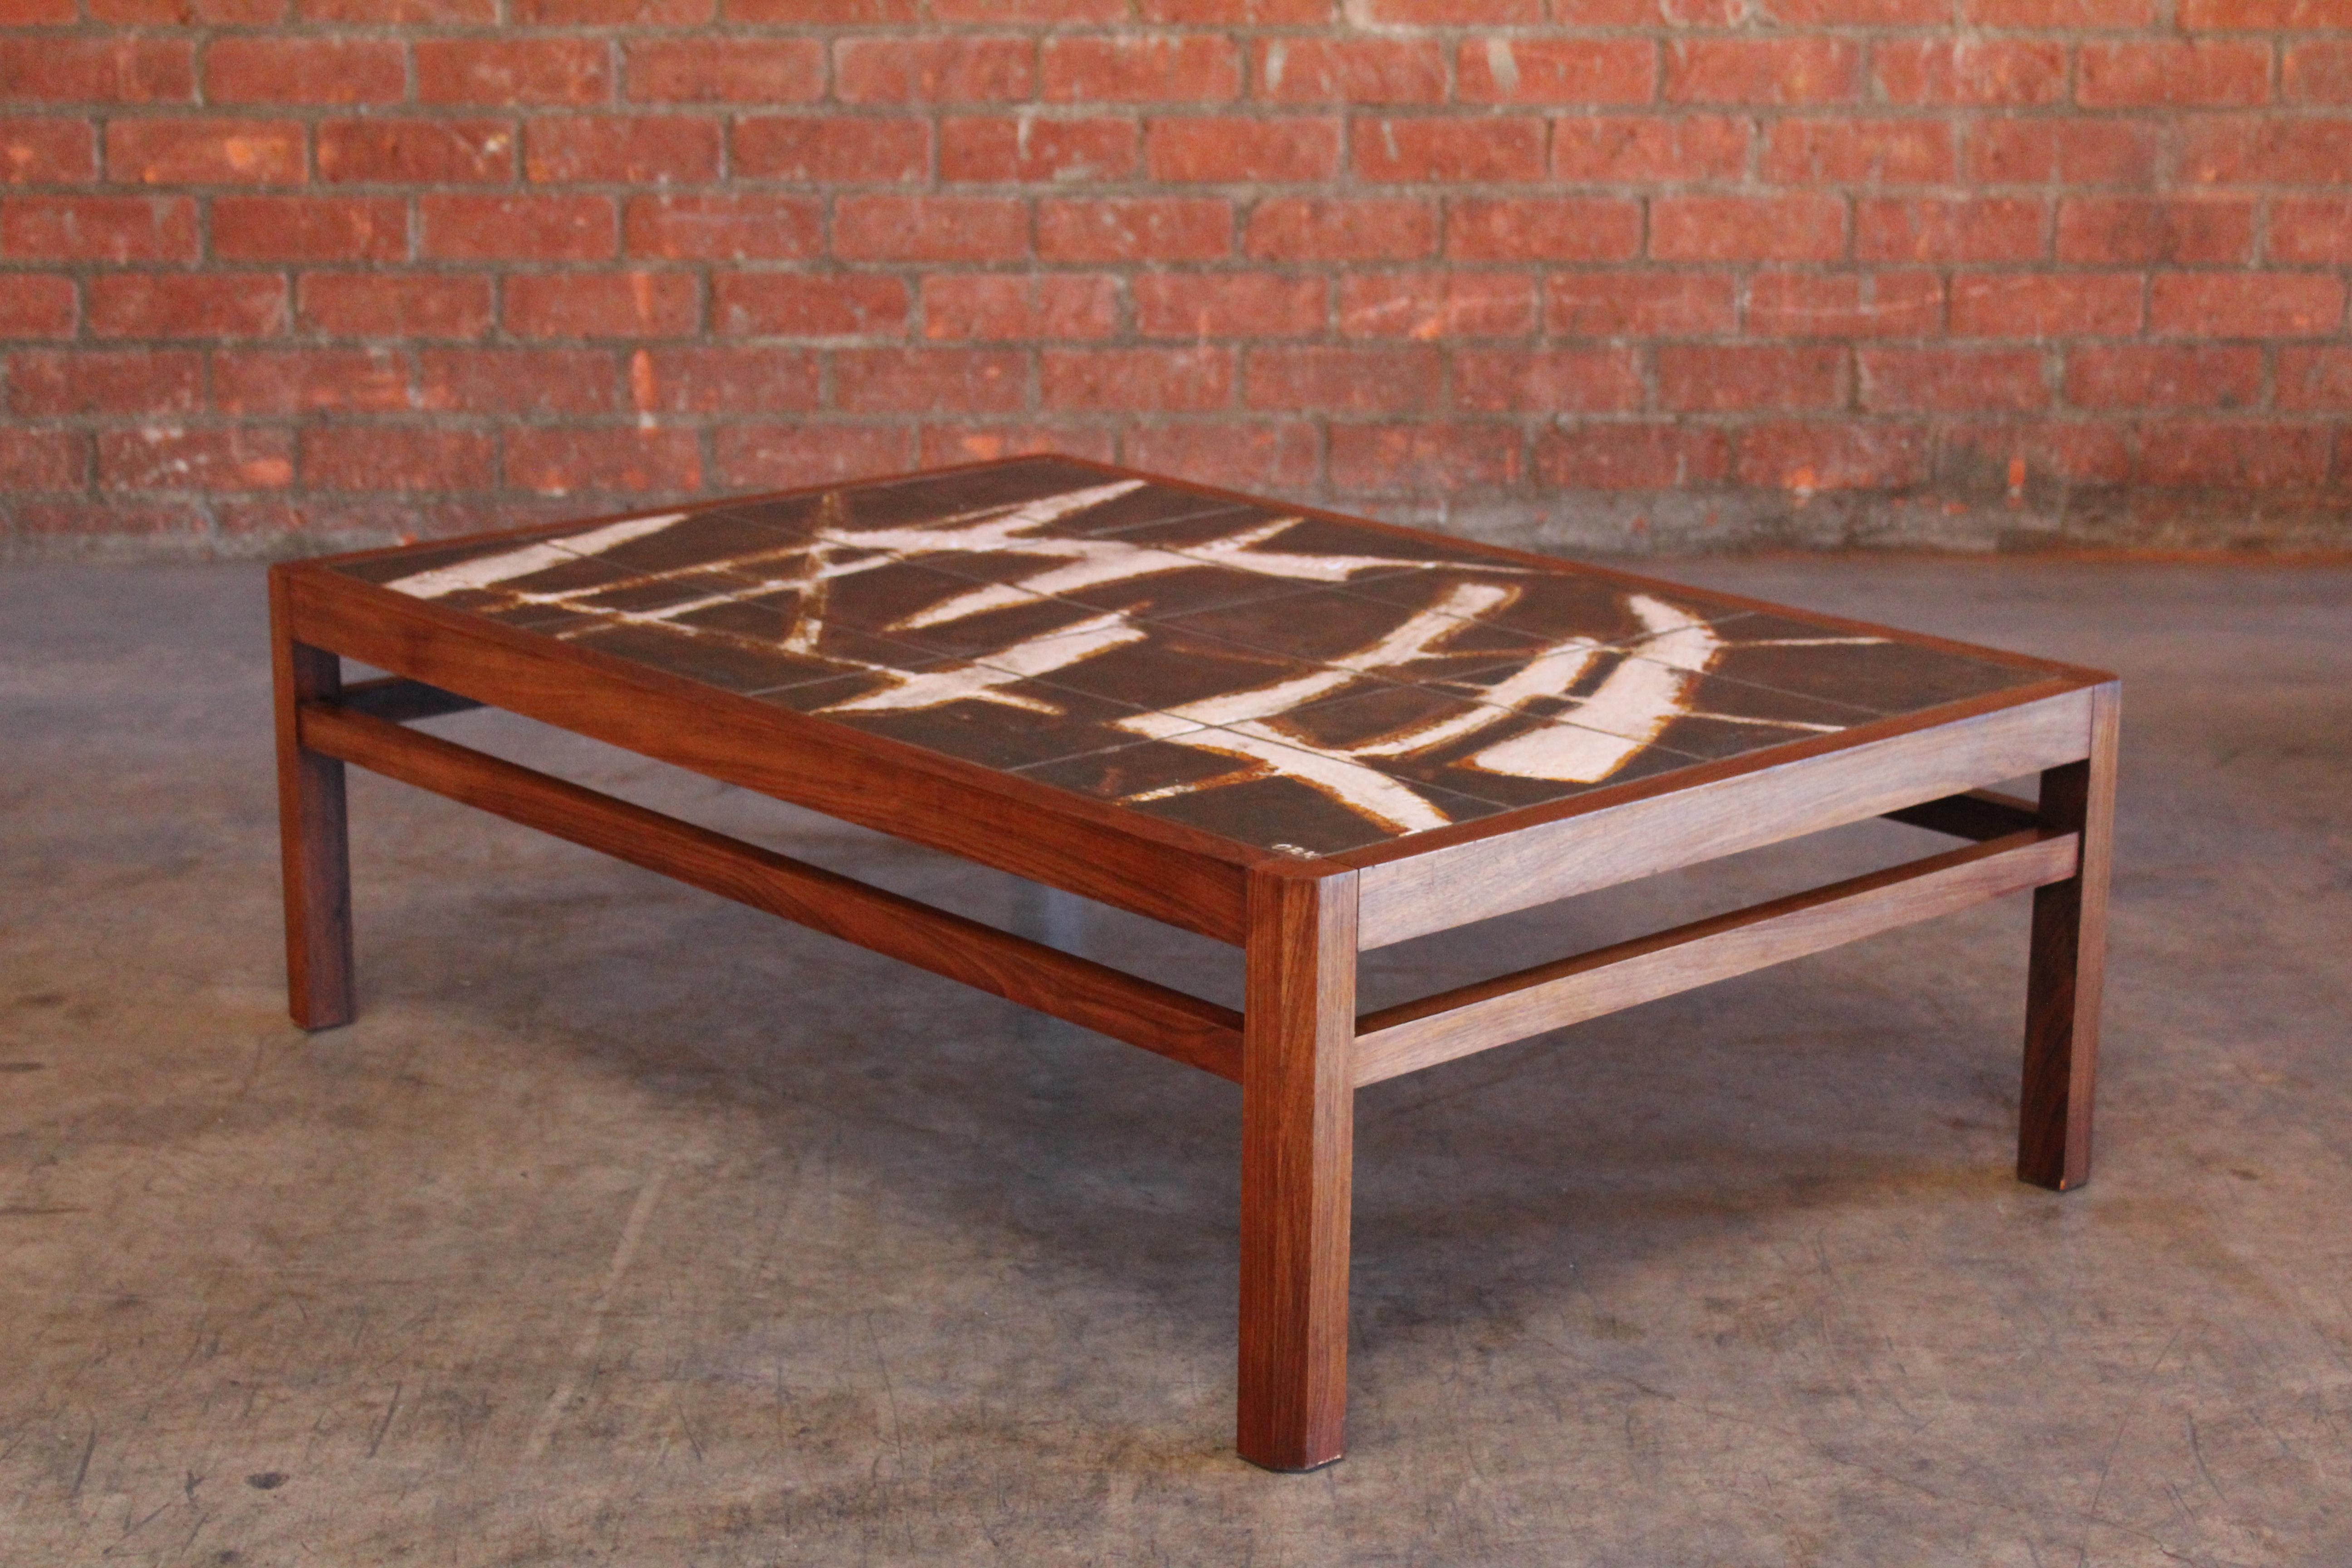 Danish Rosewood and Ceramic Tile Coffee Table by Ole Bjorn Krüger, 1960s For Sale 7